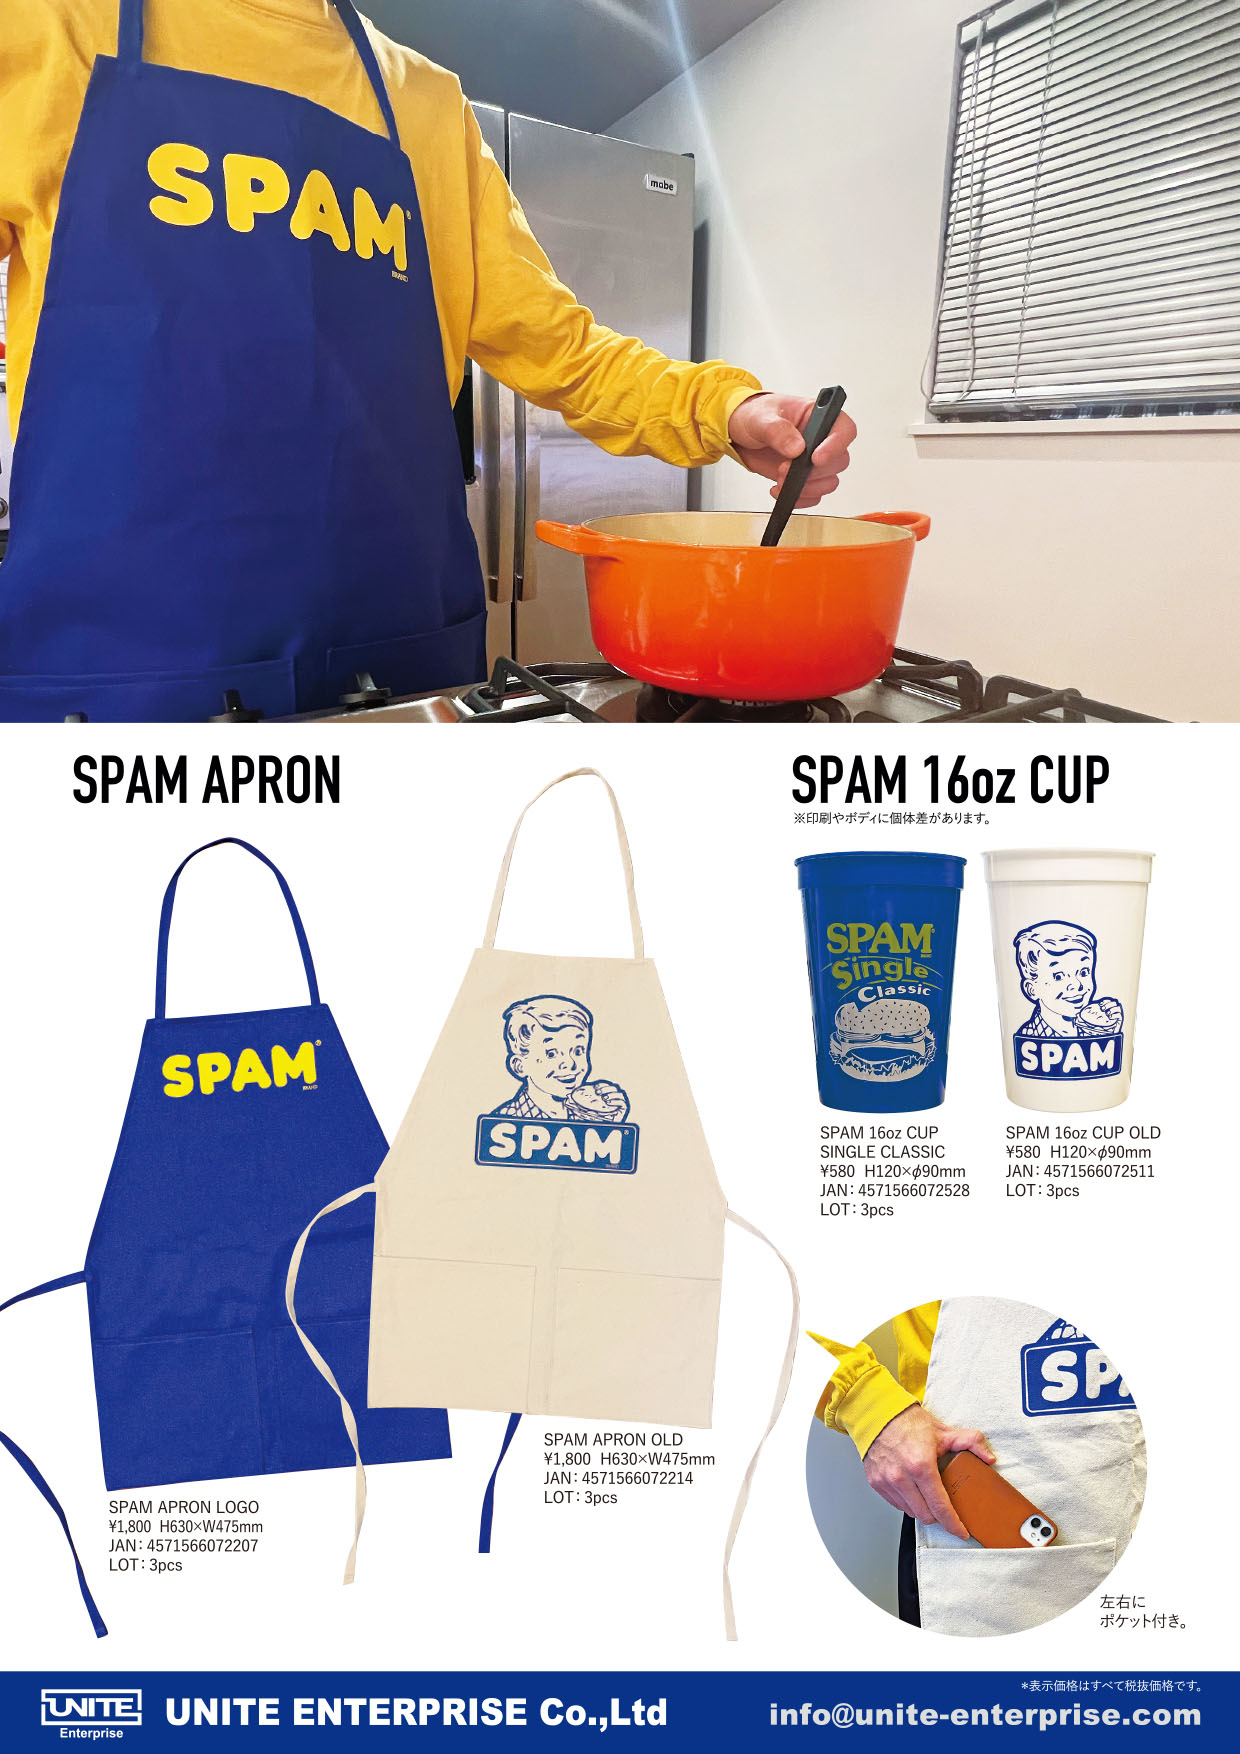 20220525＿SPAM APRON CUP